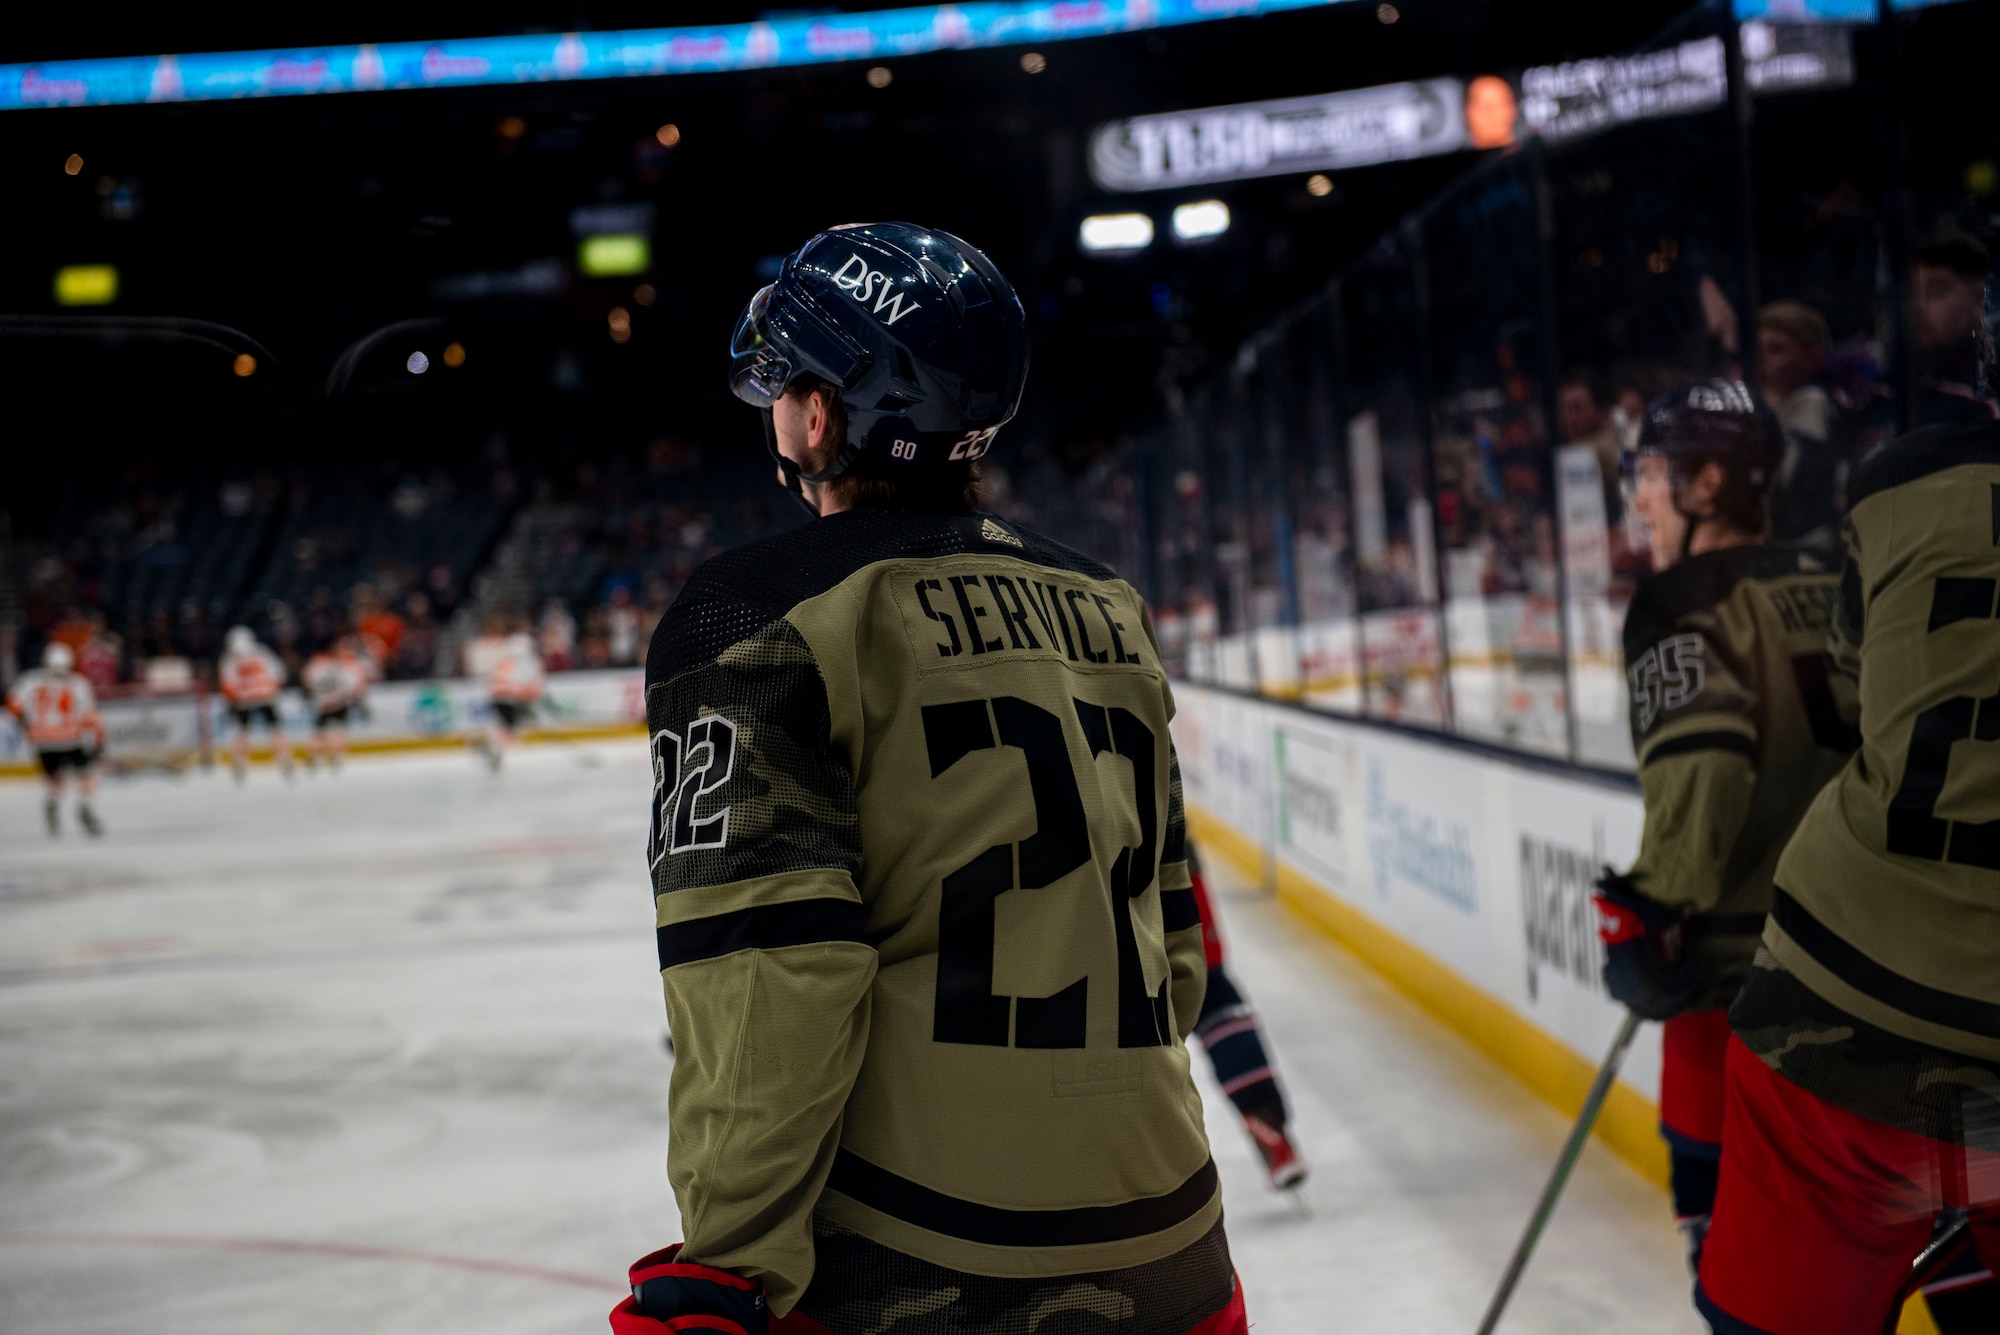 Jake Bean (22), a Columbus Blue Jackets defenseman, warms up in a camouflage-style uniform as part of Military Appreciation Night on April 7, 2022, at Nationwide Arena, Columbus, Ohio. Prior to facing the Philadelphia Flyers, the team hosted a friendly alumni exhibition with the Wright Flyers, as well as several other recognition activities throughout the night. (U.S. Air Force photo by Senior Airman Jack Gardner)